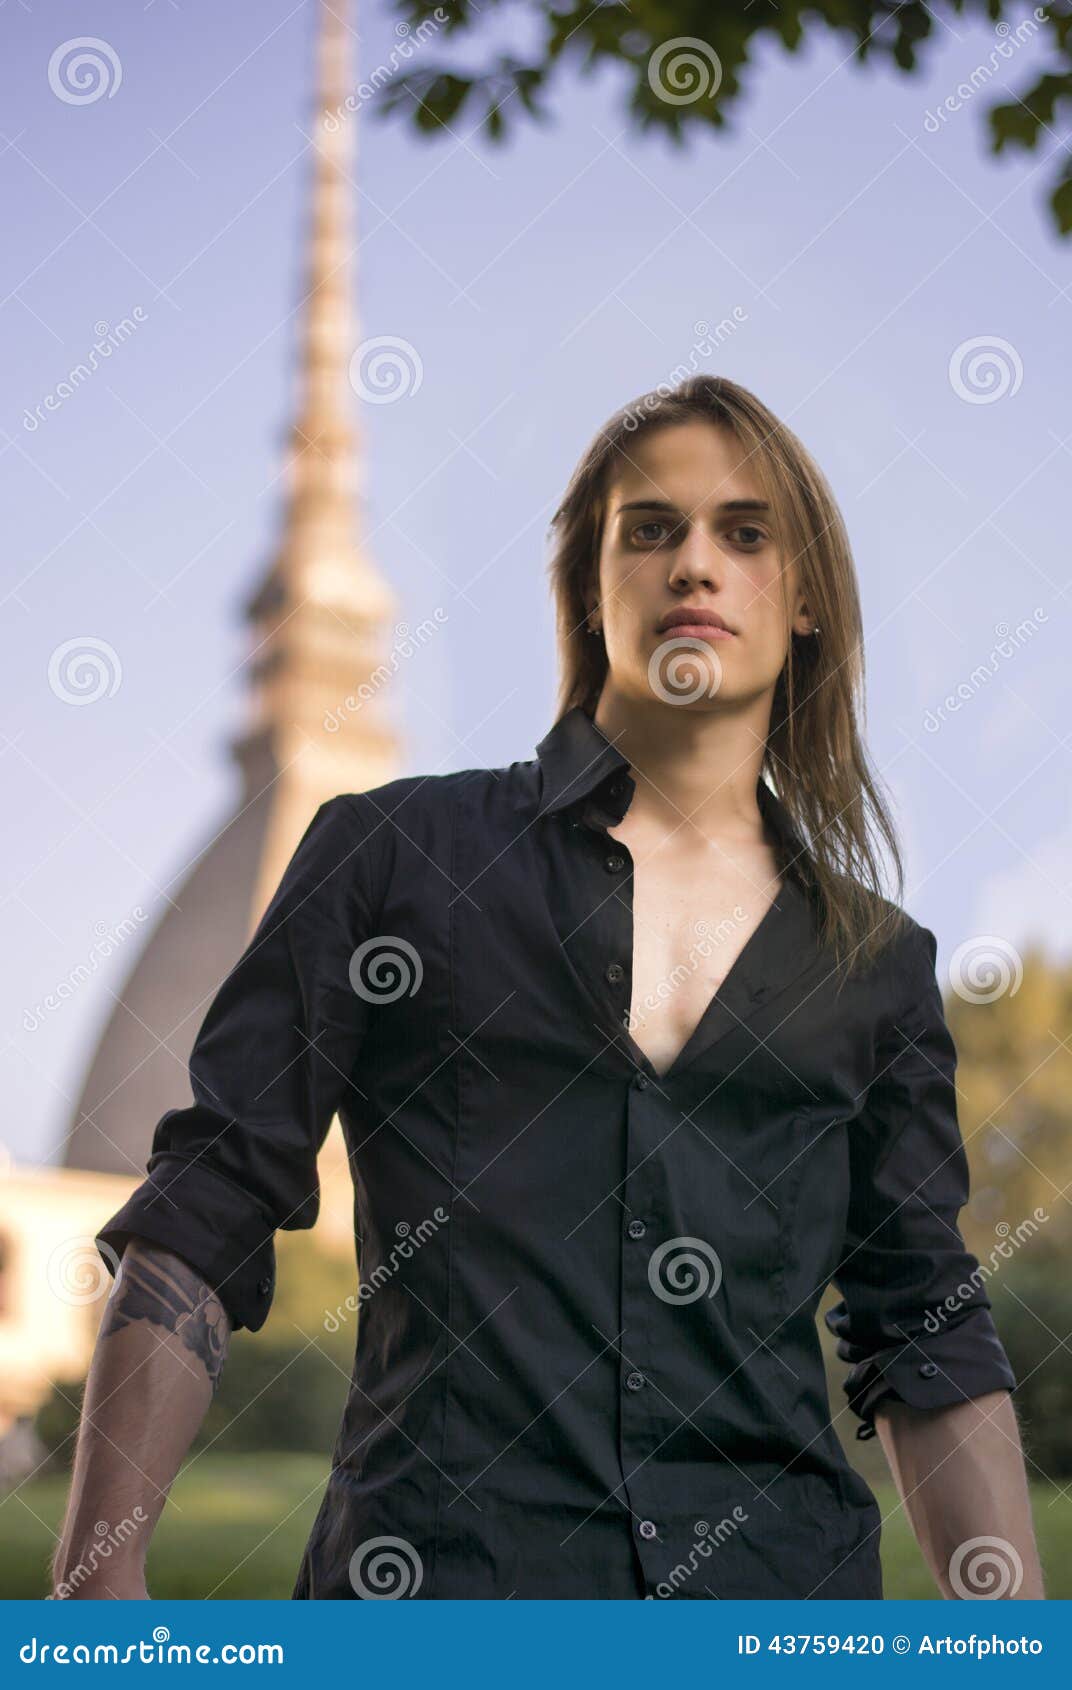 handsome young man next to mole antonelliana in turin, italy